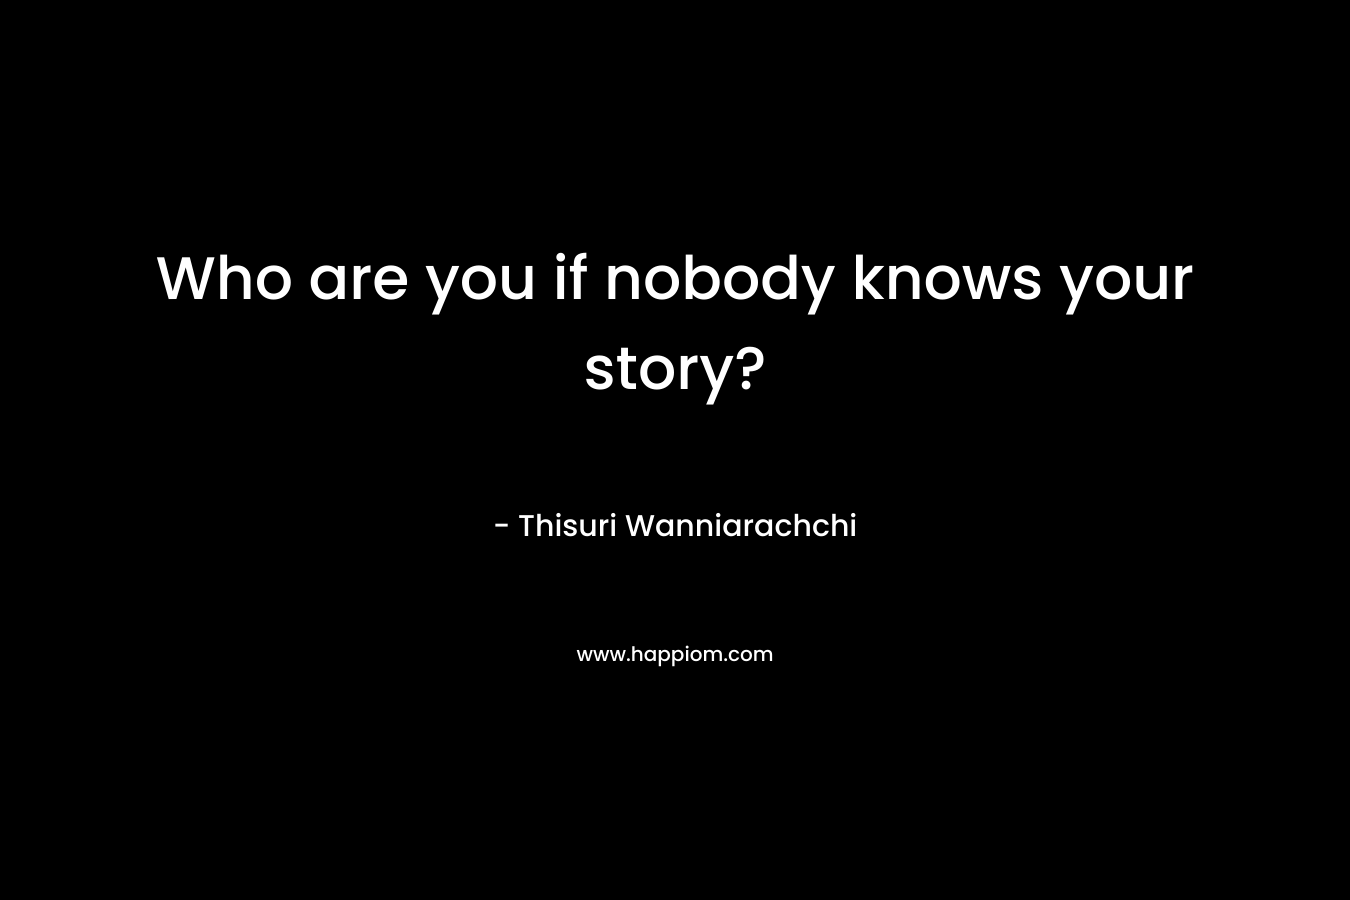 Who are you if nobody knows your story?